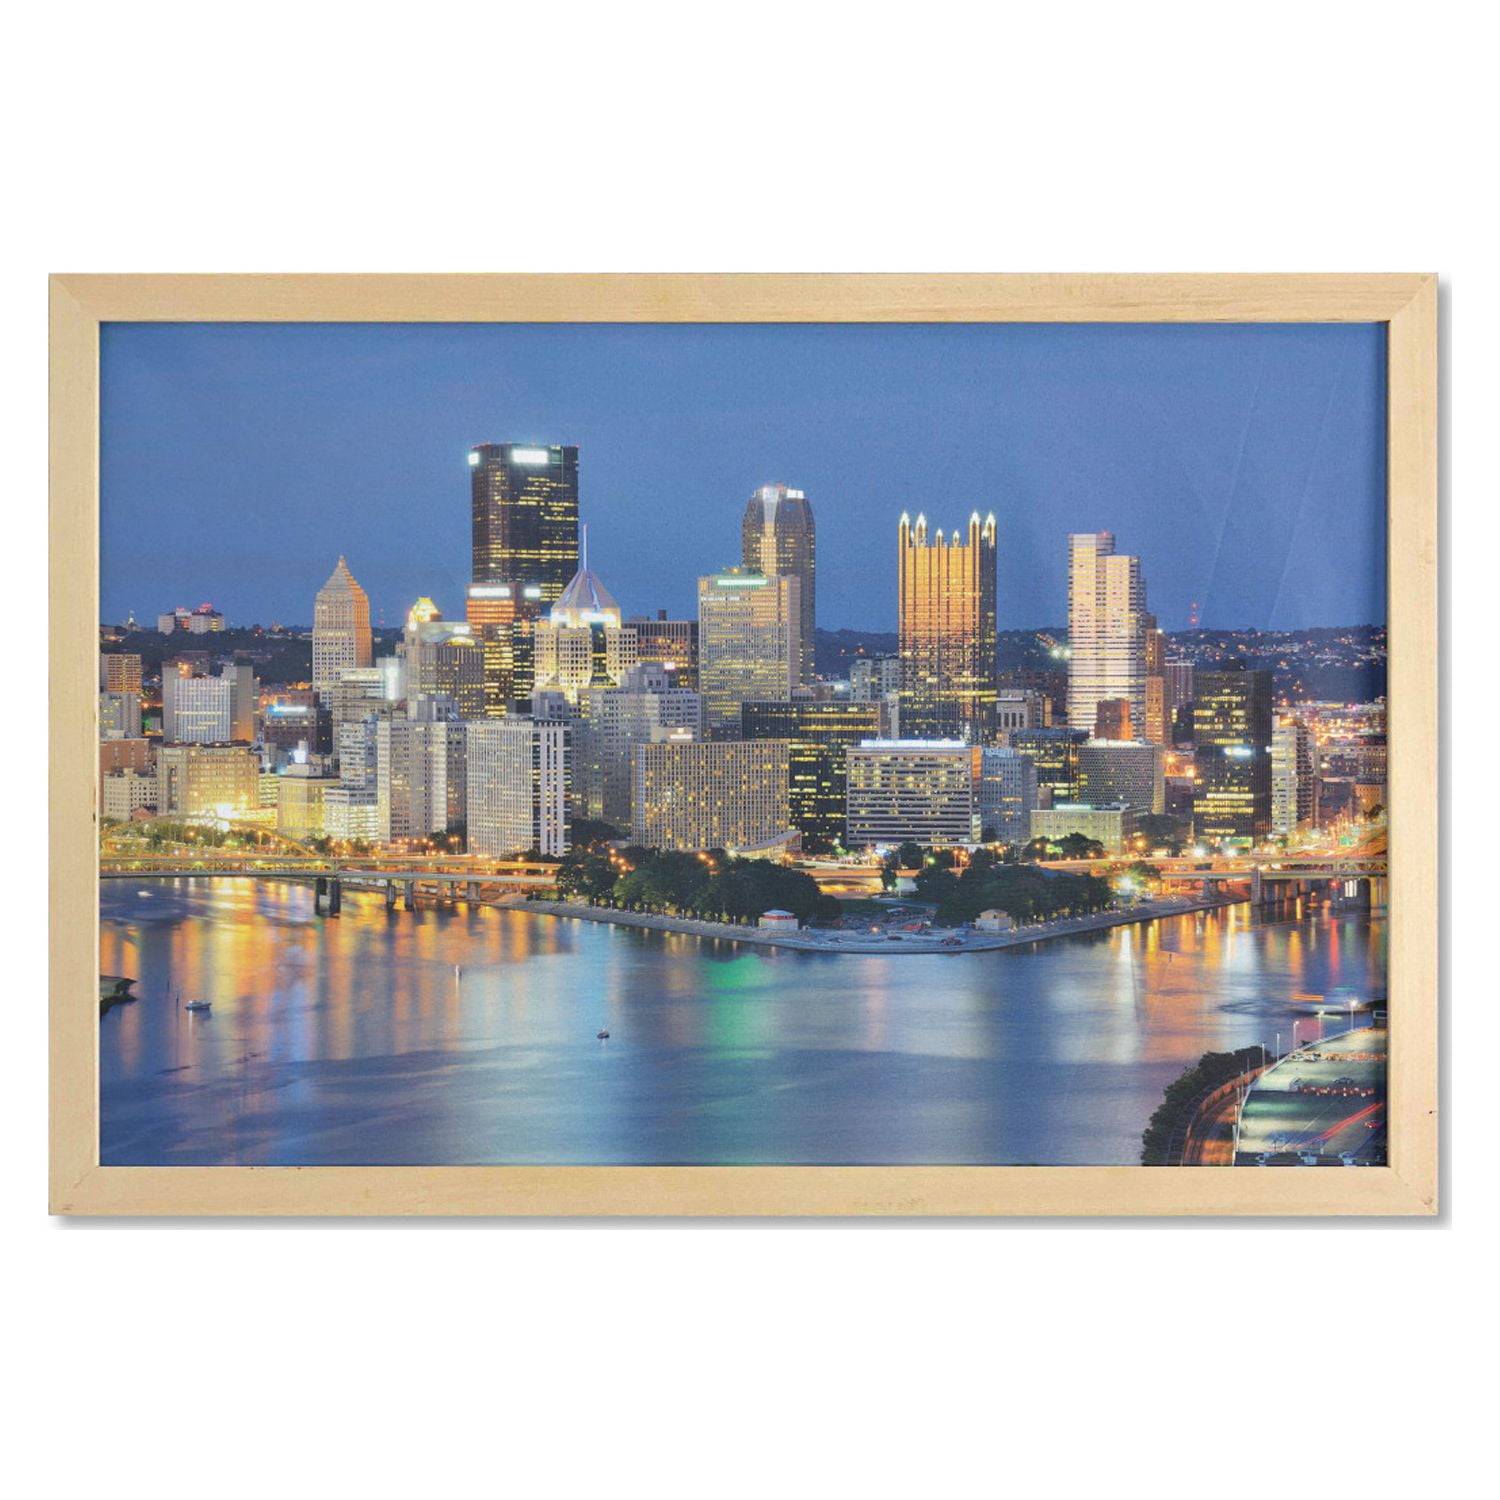 City Pittsburgh Wall Art with Frame, Night Scene of Skyscrapers in Downtown  Pennsylvania Skyline Busy City Life, Printed Fabric Poster for Bathroom Living  Room, 35